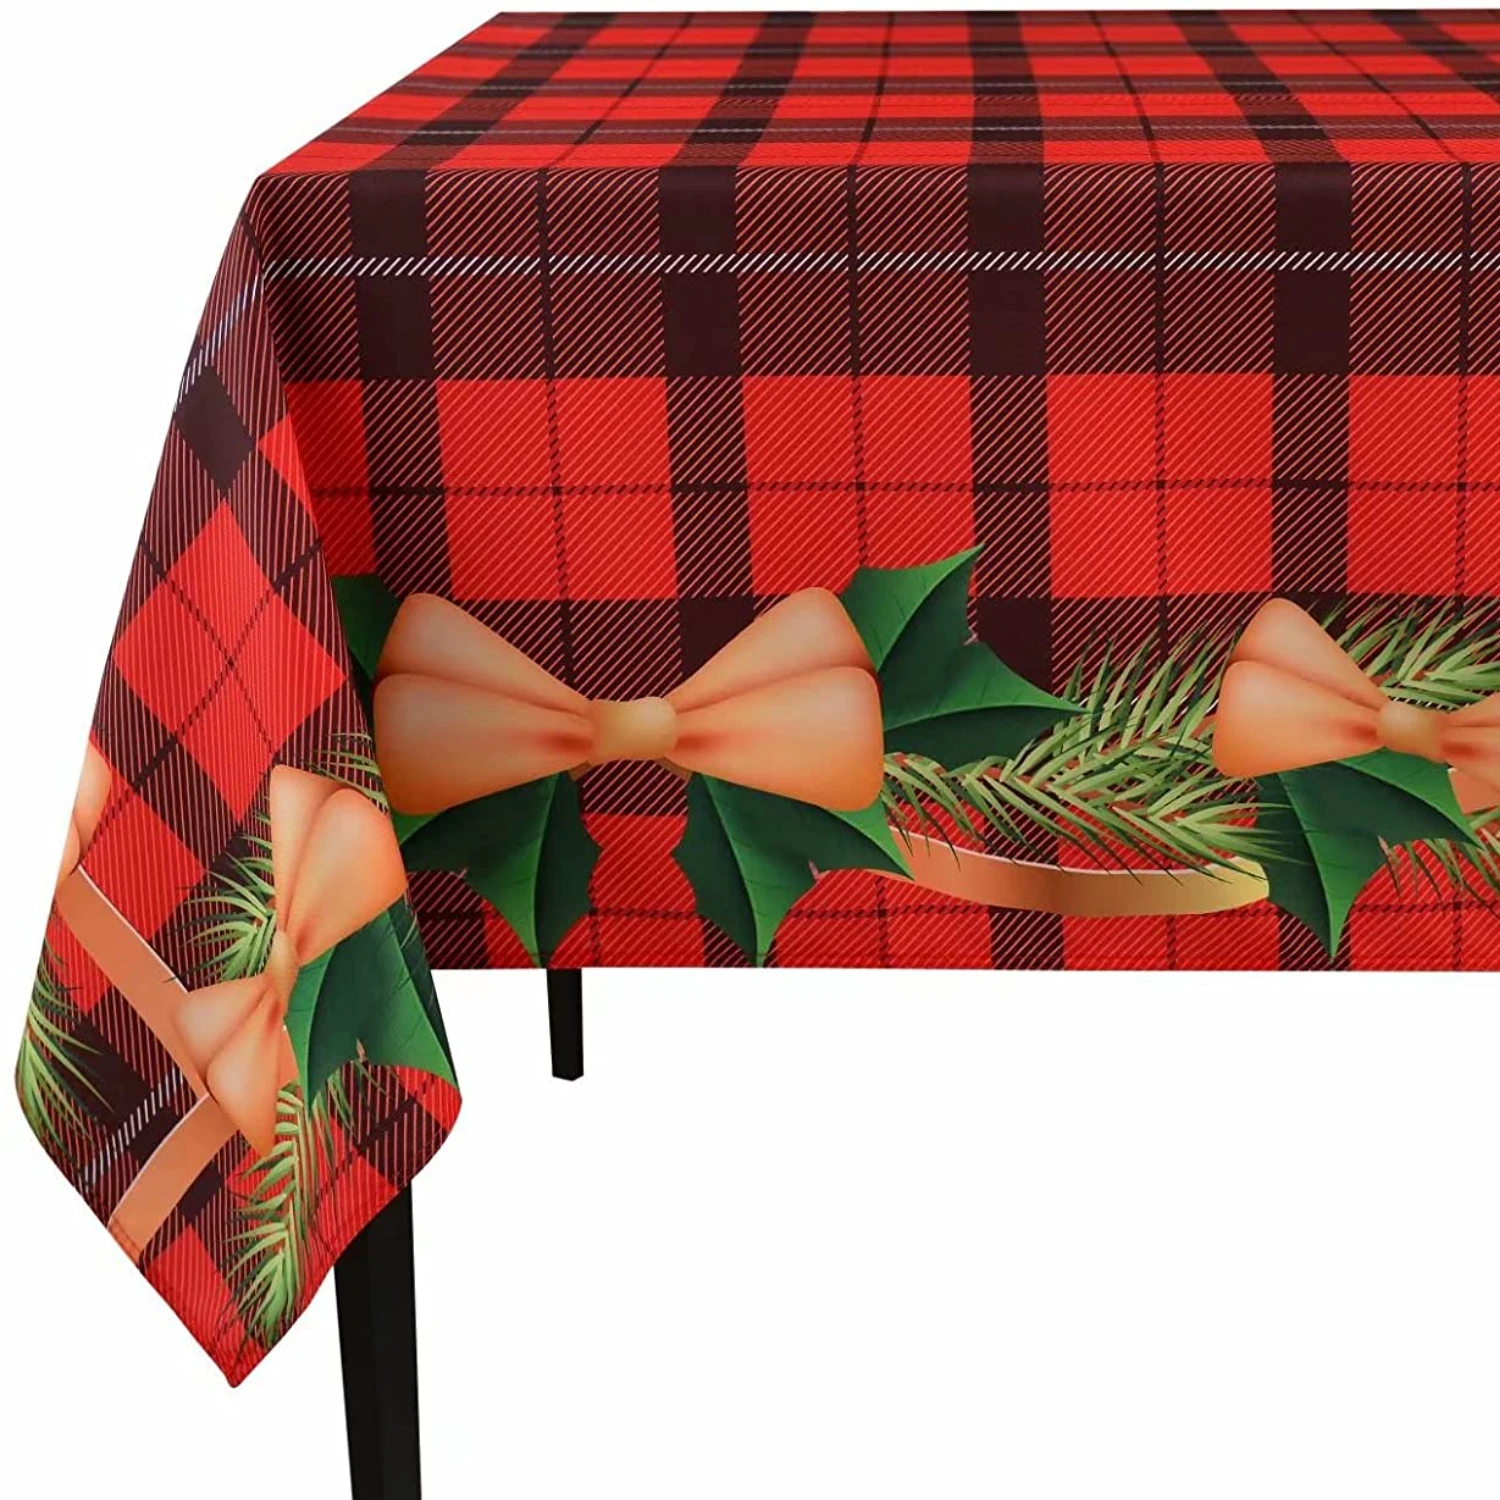 

Christmas Checkered Rectangle Tablecloth with Bow Linen Dustproof Tablecloth, Home Dinner Tablecloth, Party Festive Decoration